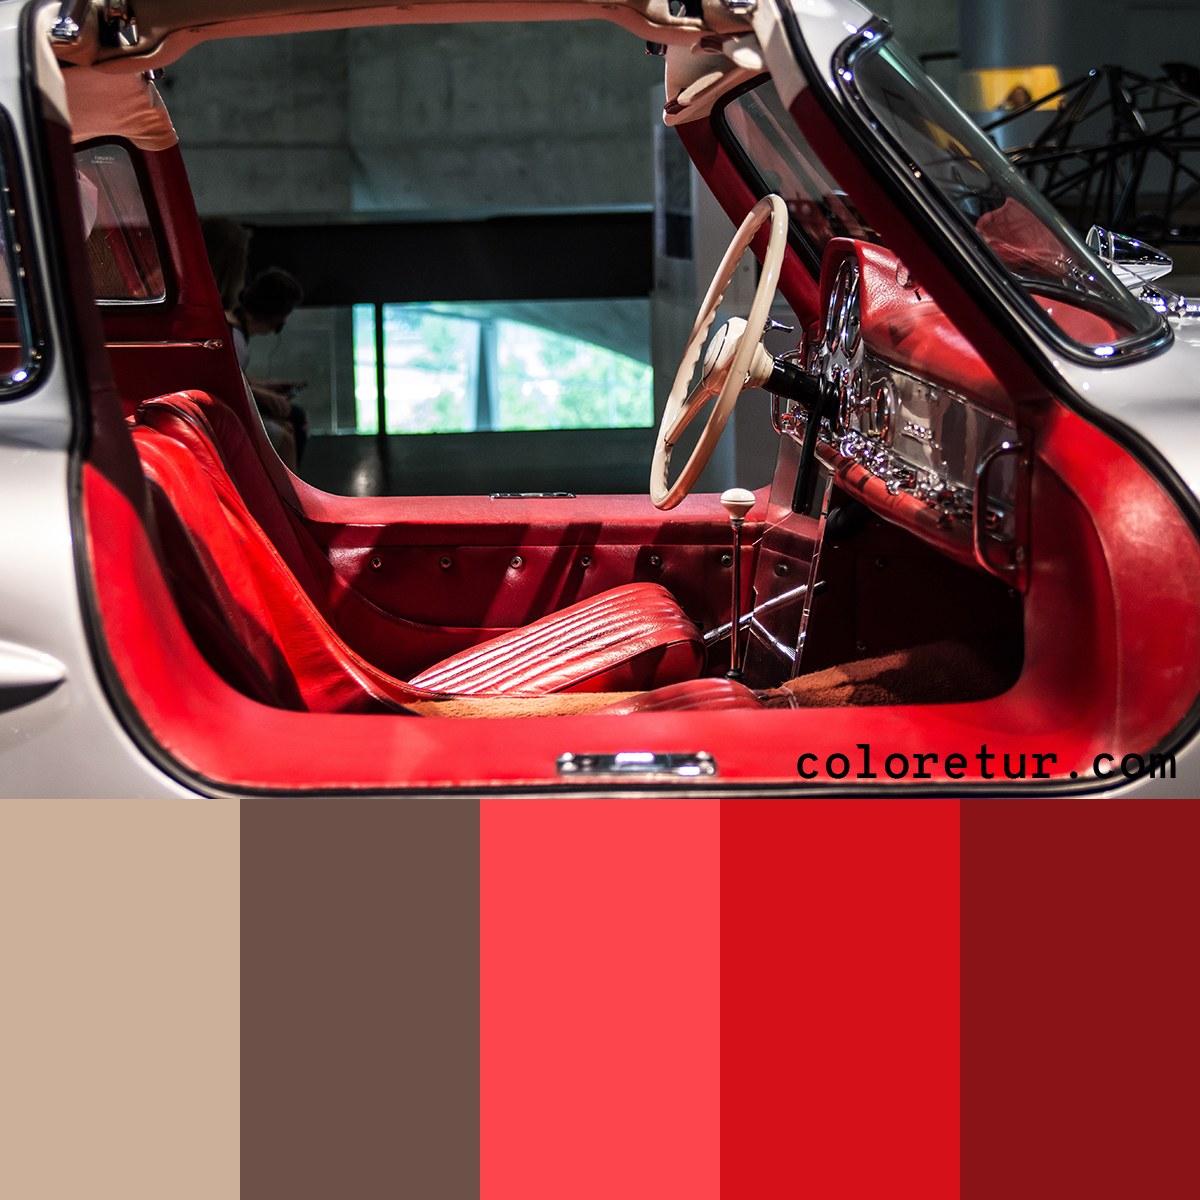 A warm palette full of reds chosen from the stunning leather of a classic car.